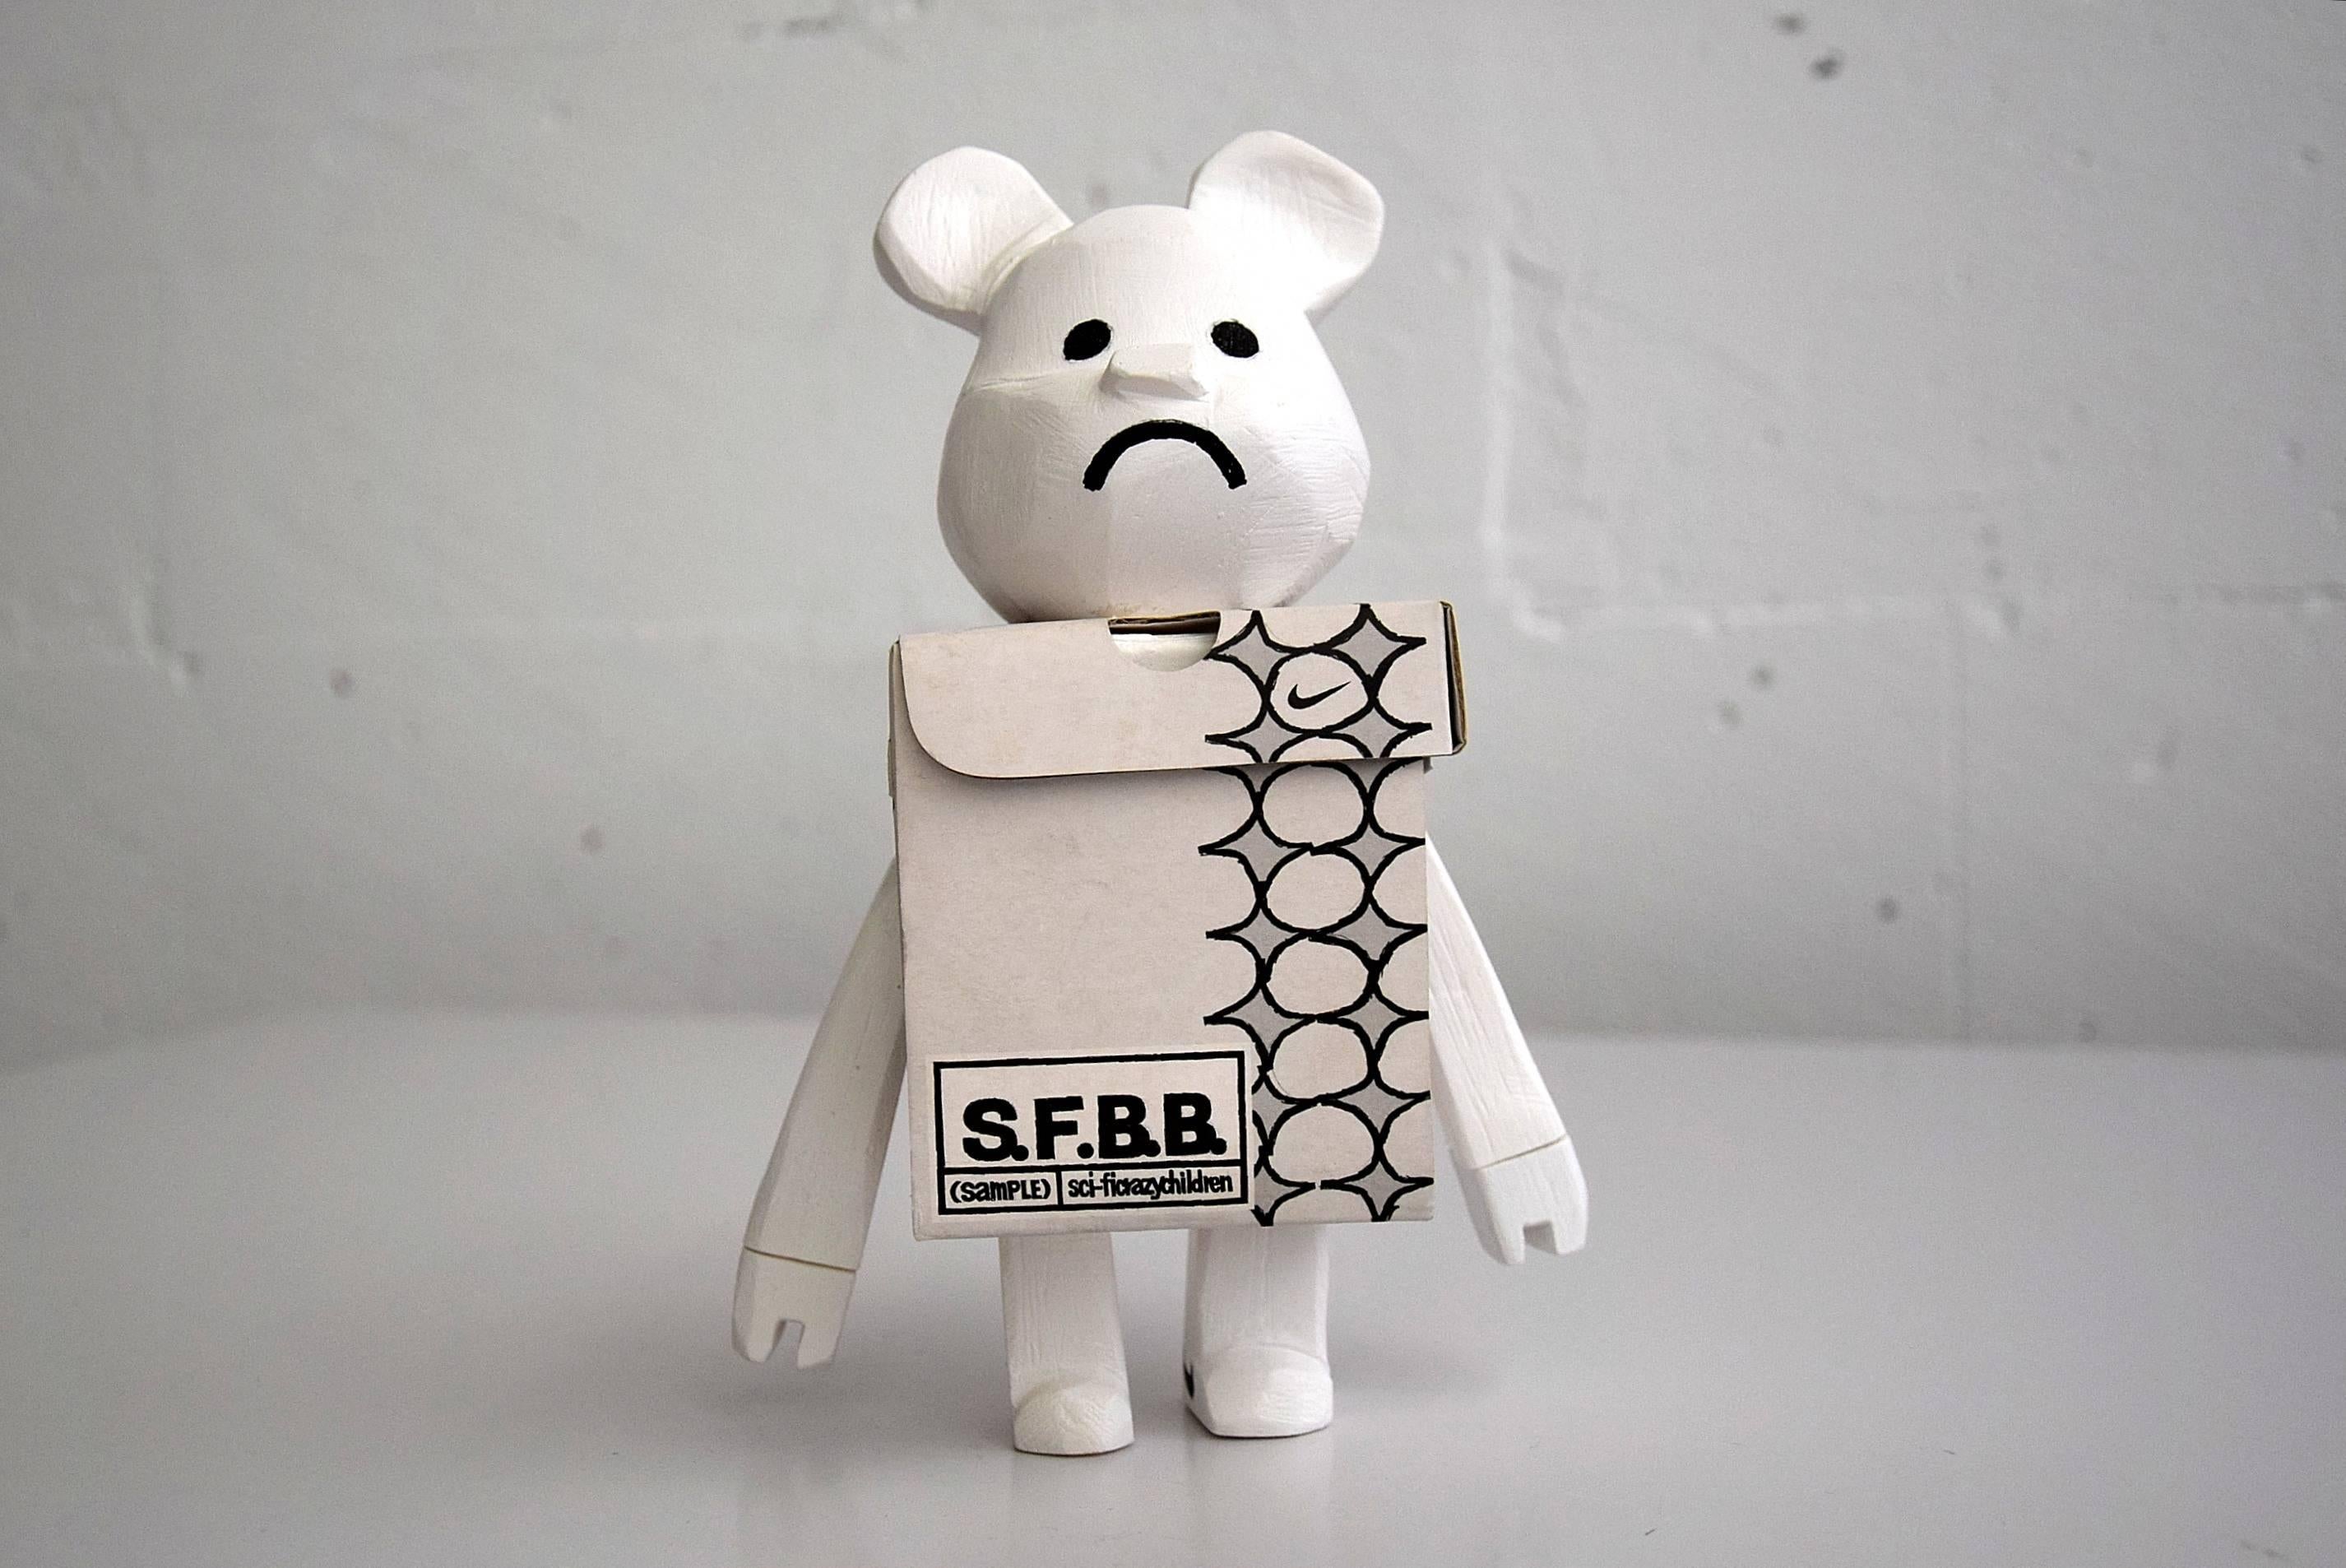 Designer Toy S.F.B.B. 'Sample' by Michael Lau, 2005 For Sale 4